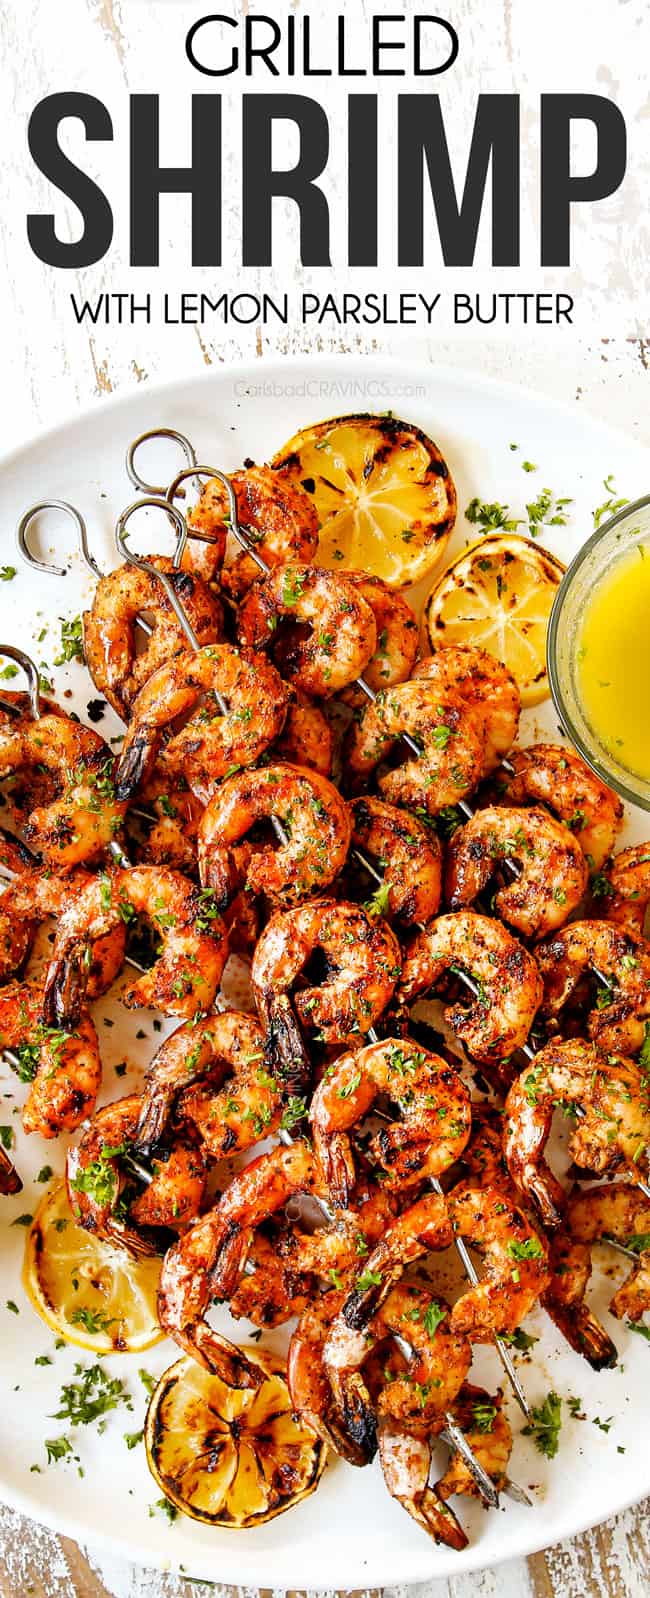 top view of grilled shrimp skewers on a white plate with charred lemons